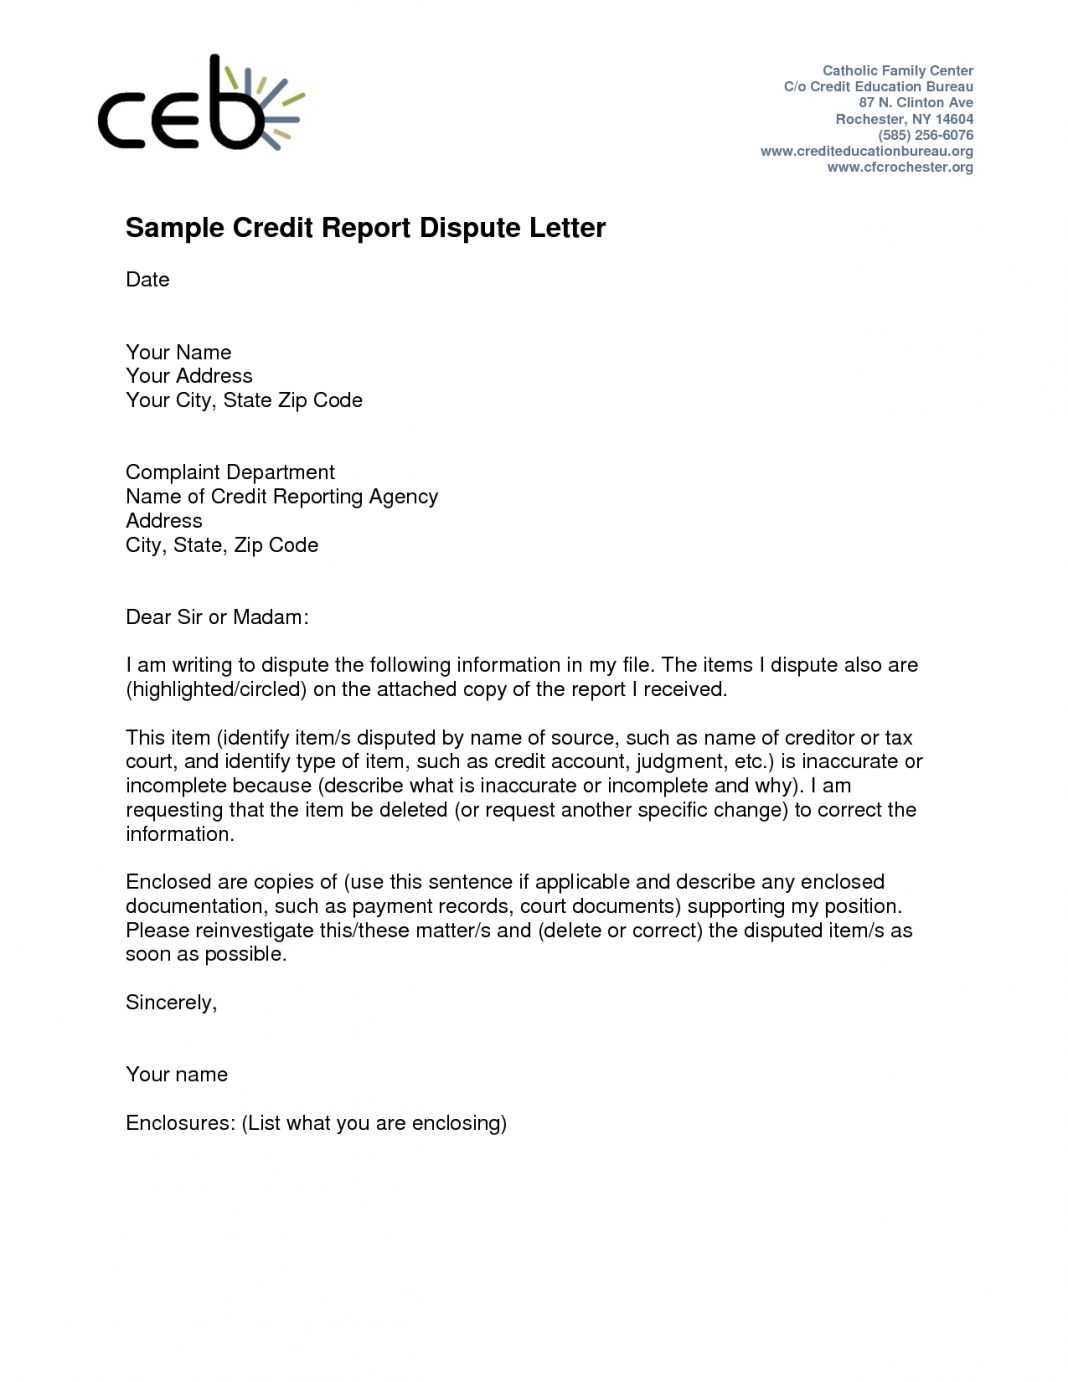 Sample Letter To Get Hard Inquiries Removed From Credit Pertaining To Credit Report Dispute Letter Template